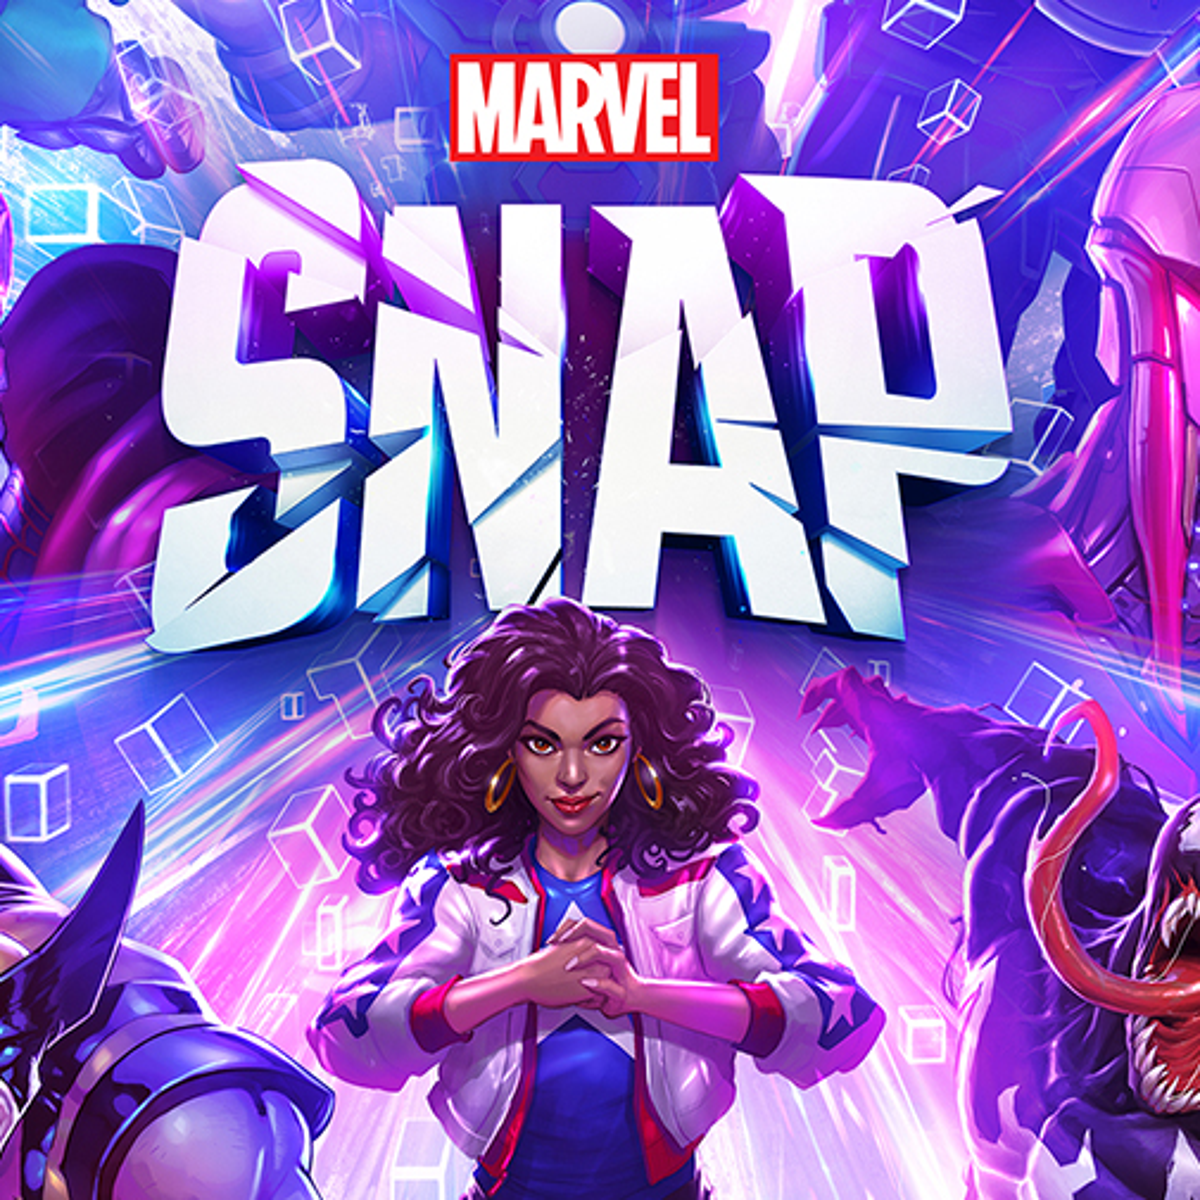 Marvel Snap has amassed $50m in global revenue since its launch